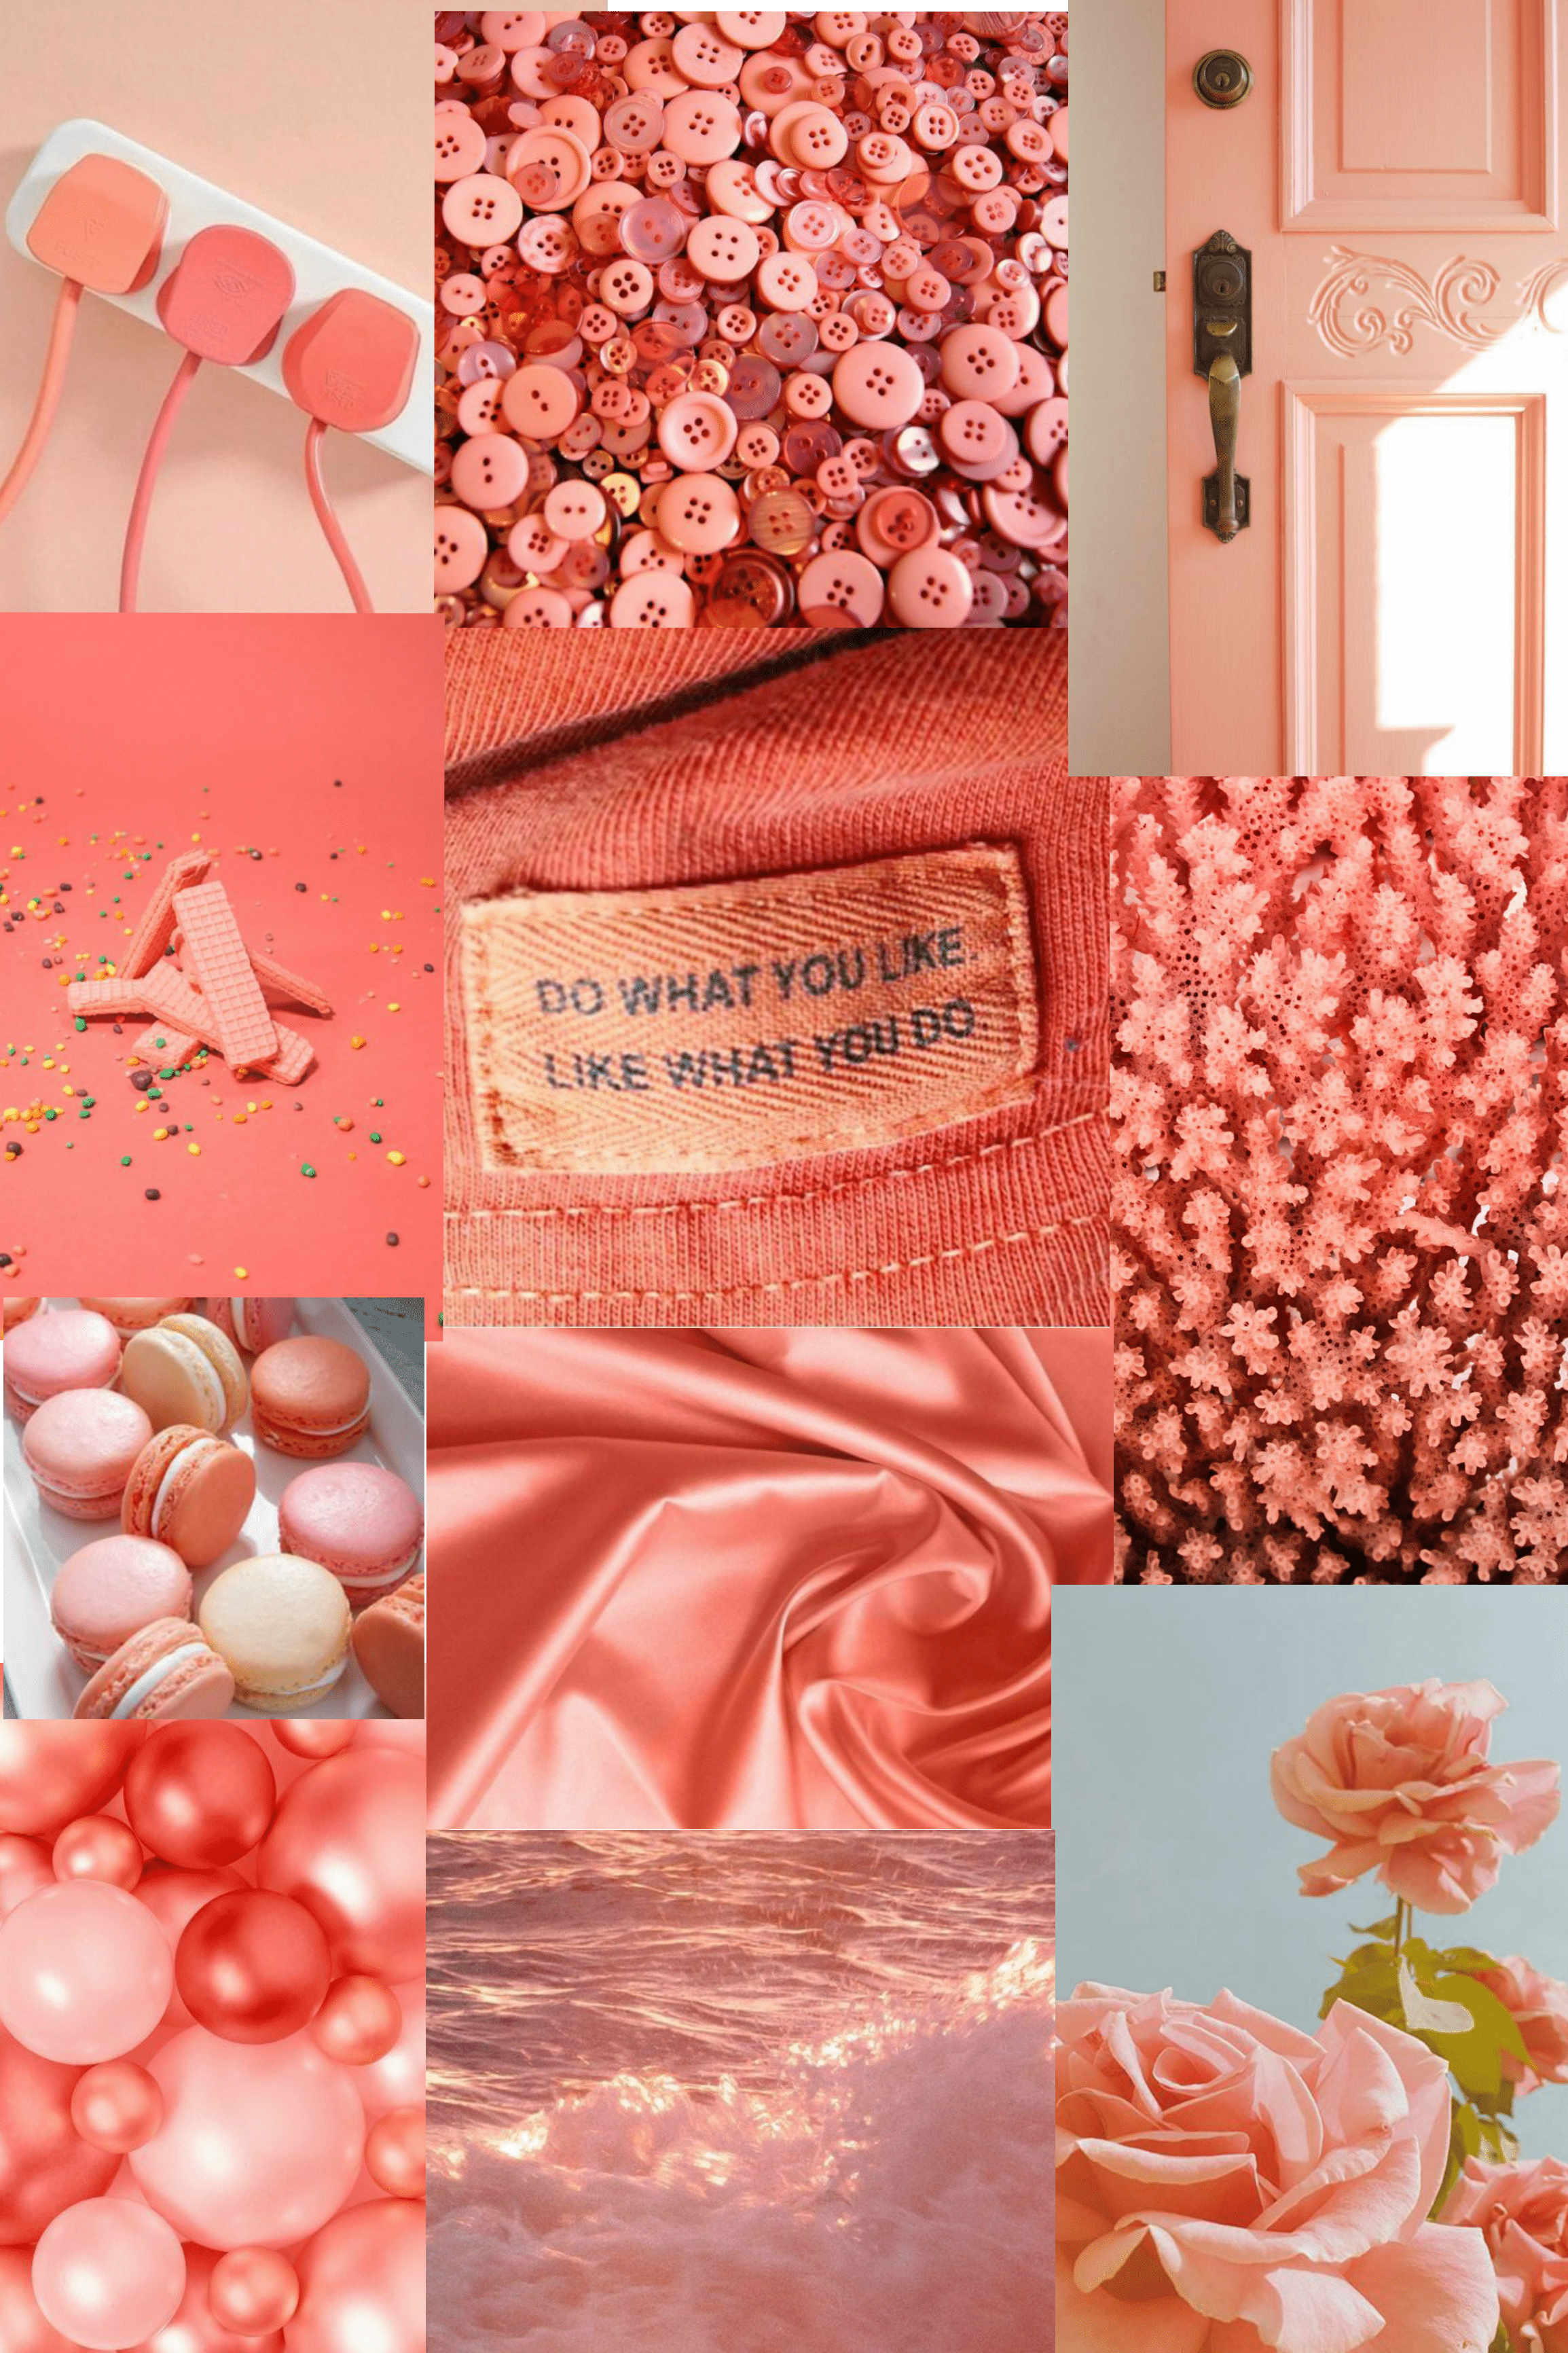 A collage of pictures with pink and red colors - Coral, salmon